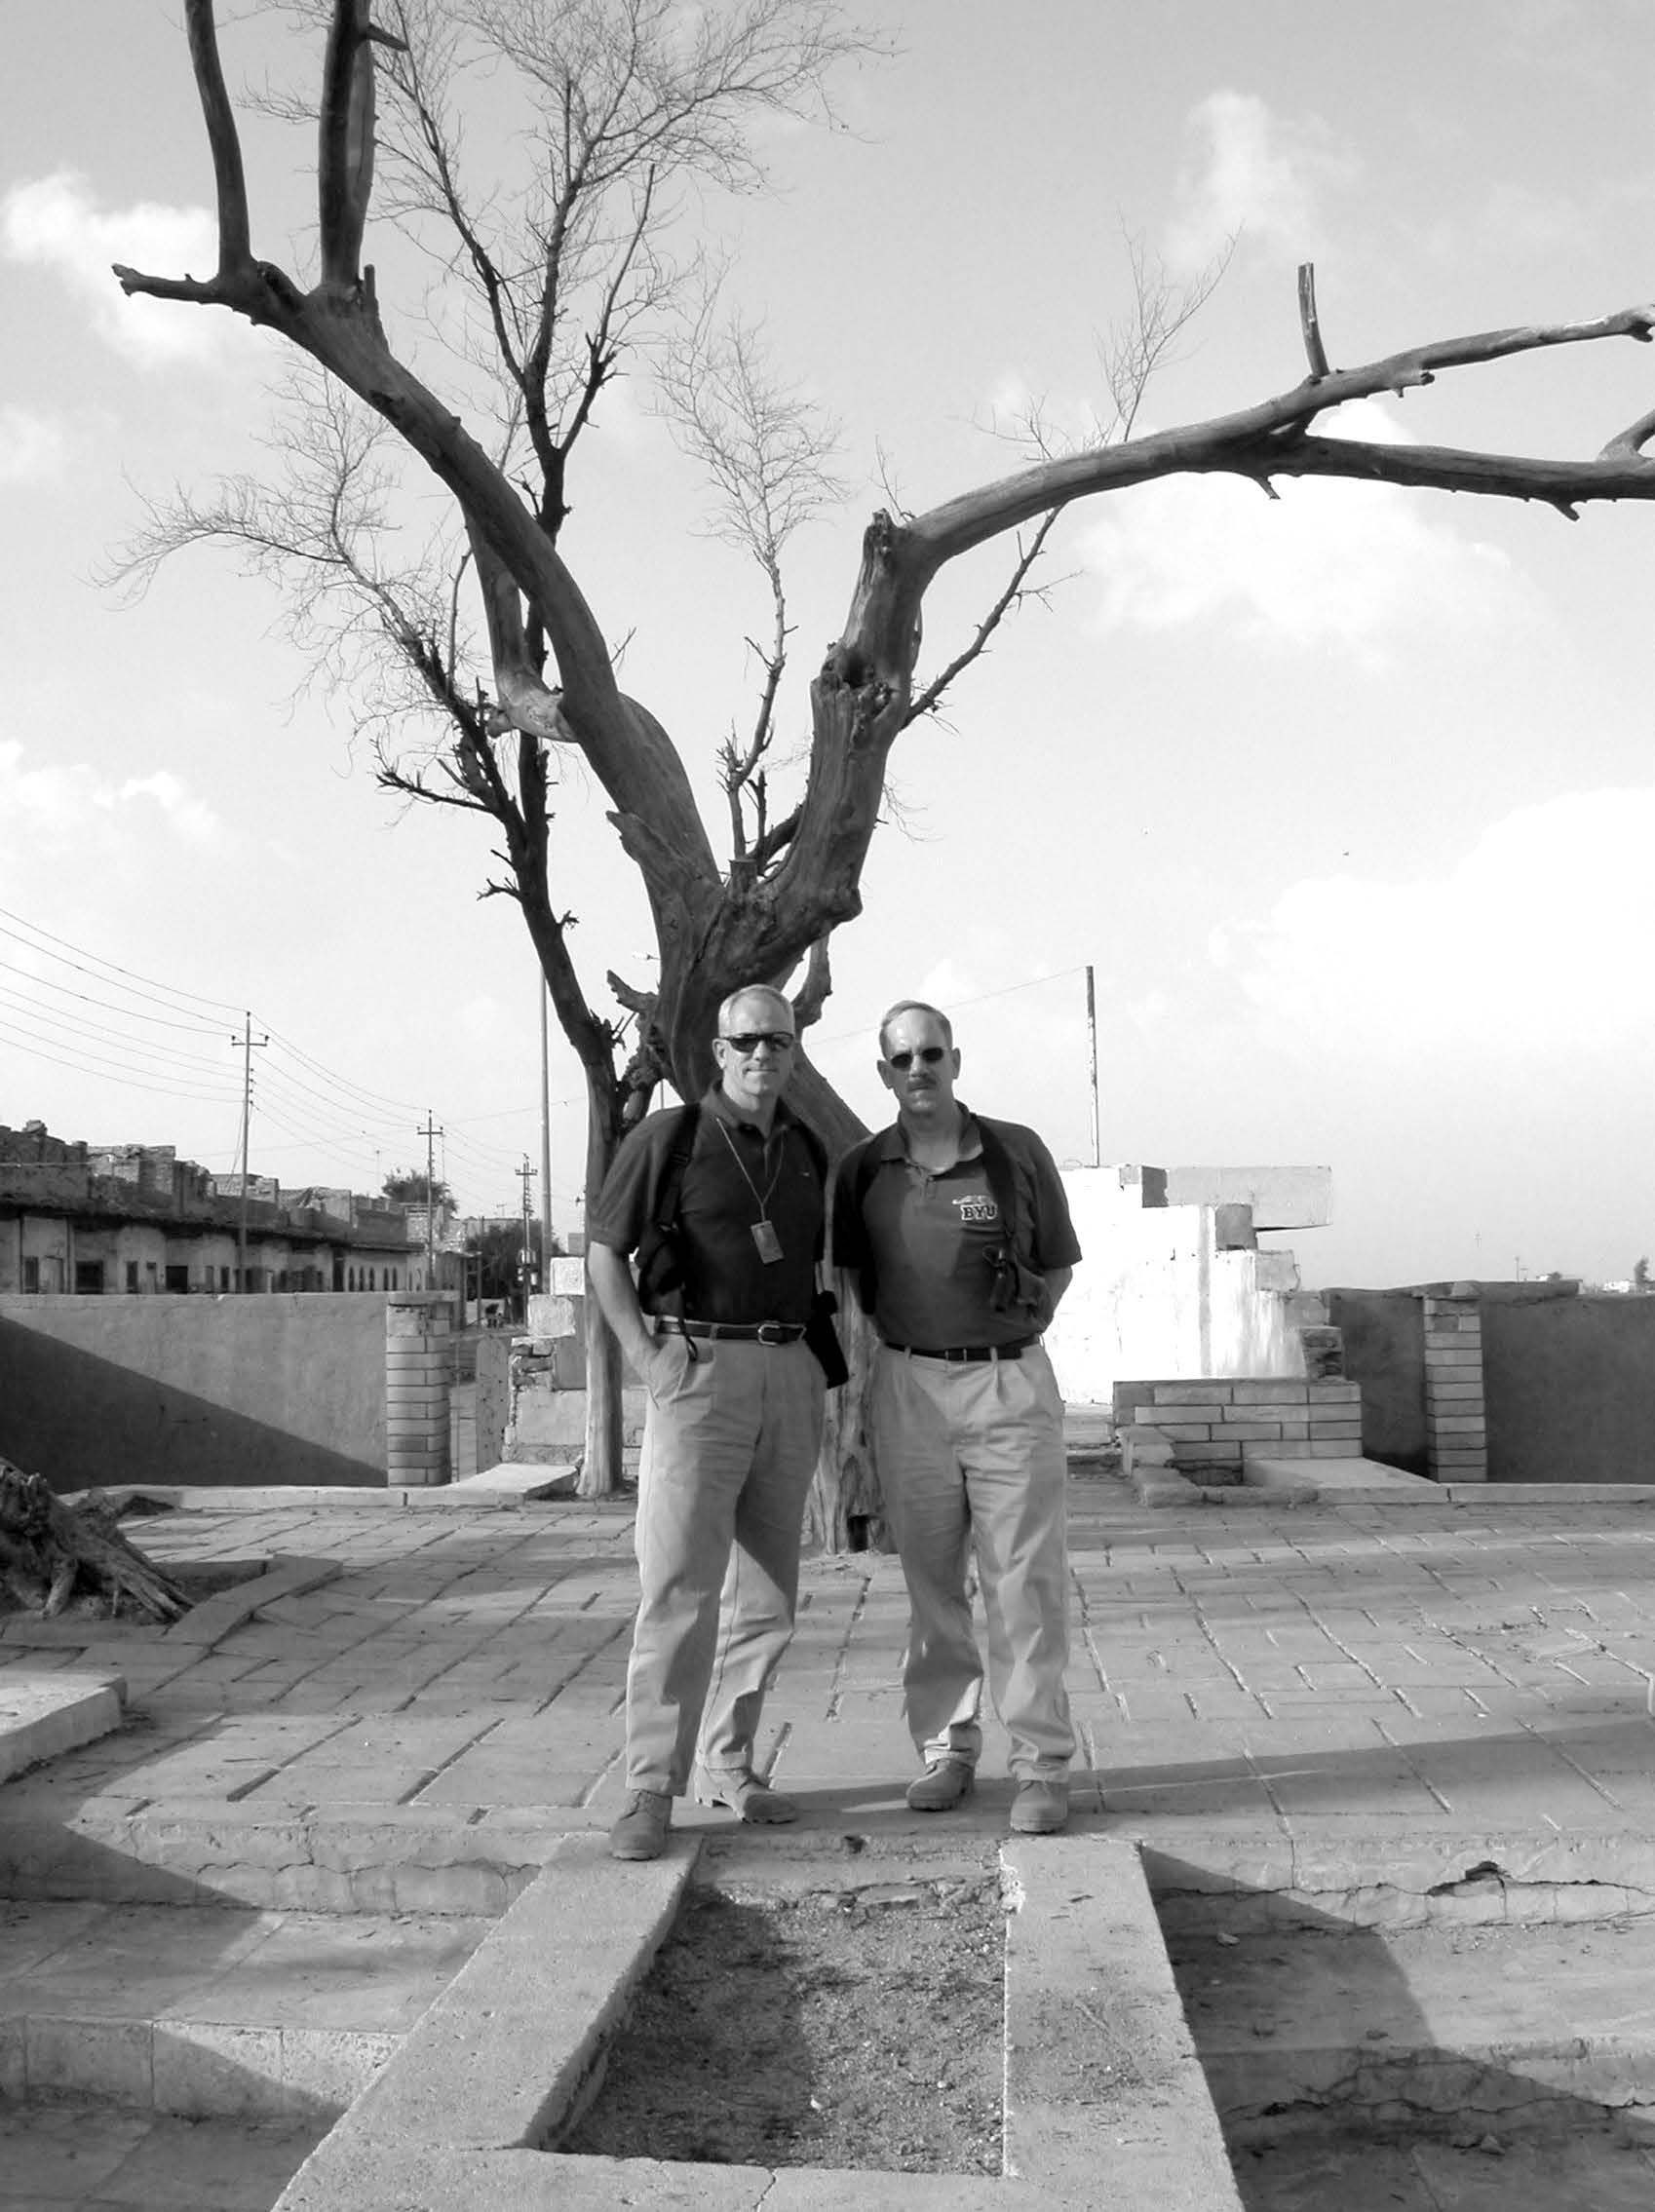 Lieutenant Colonel Kevin R. Riedler (right) and Colonel Jim Slavin are pictured standing in front of the “Adam Tree” near where the Tigress and Euphrates Rivers meet—a site traditionally accepted by some people as the location of the Garden of Eden. Courtesy of Kevin R. Riedler.